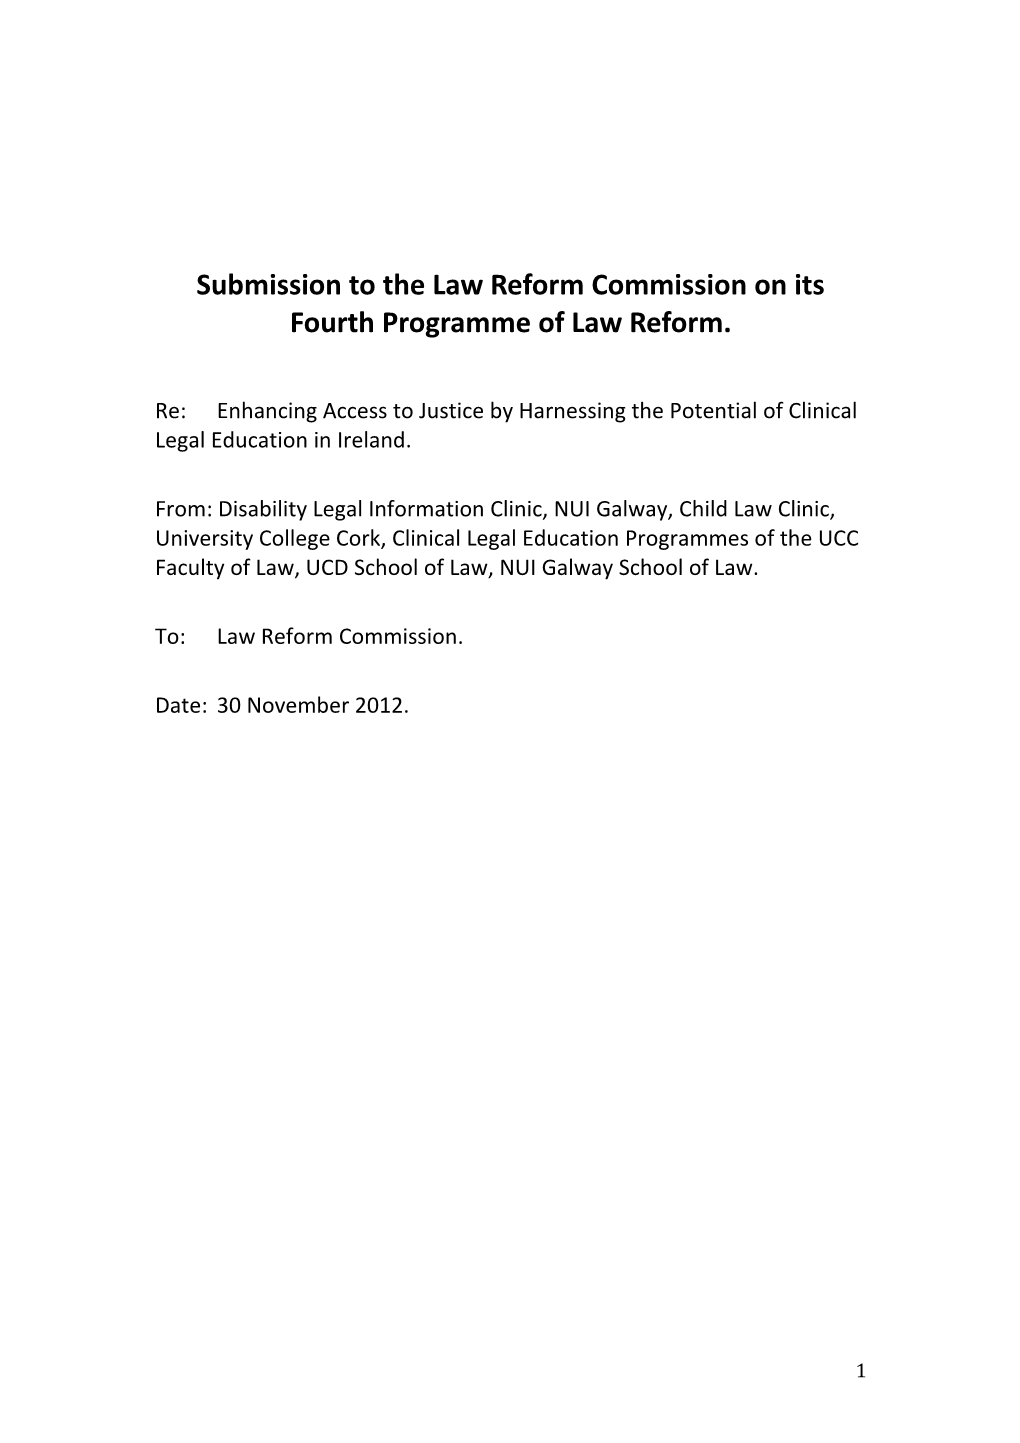 Submission to the Law Reform Commission on Its Fourth Programme of Law Reform